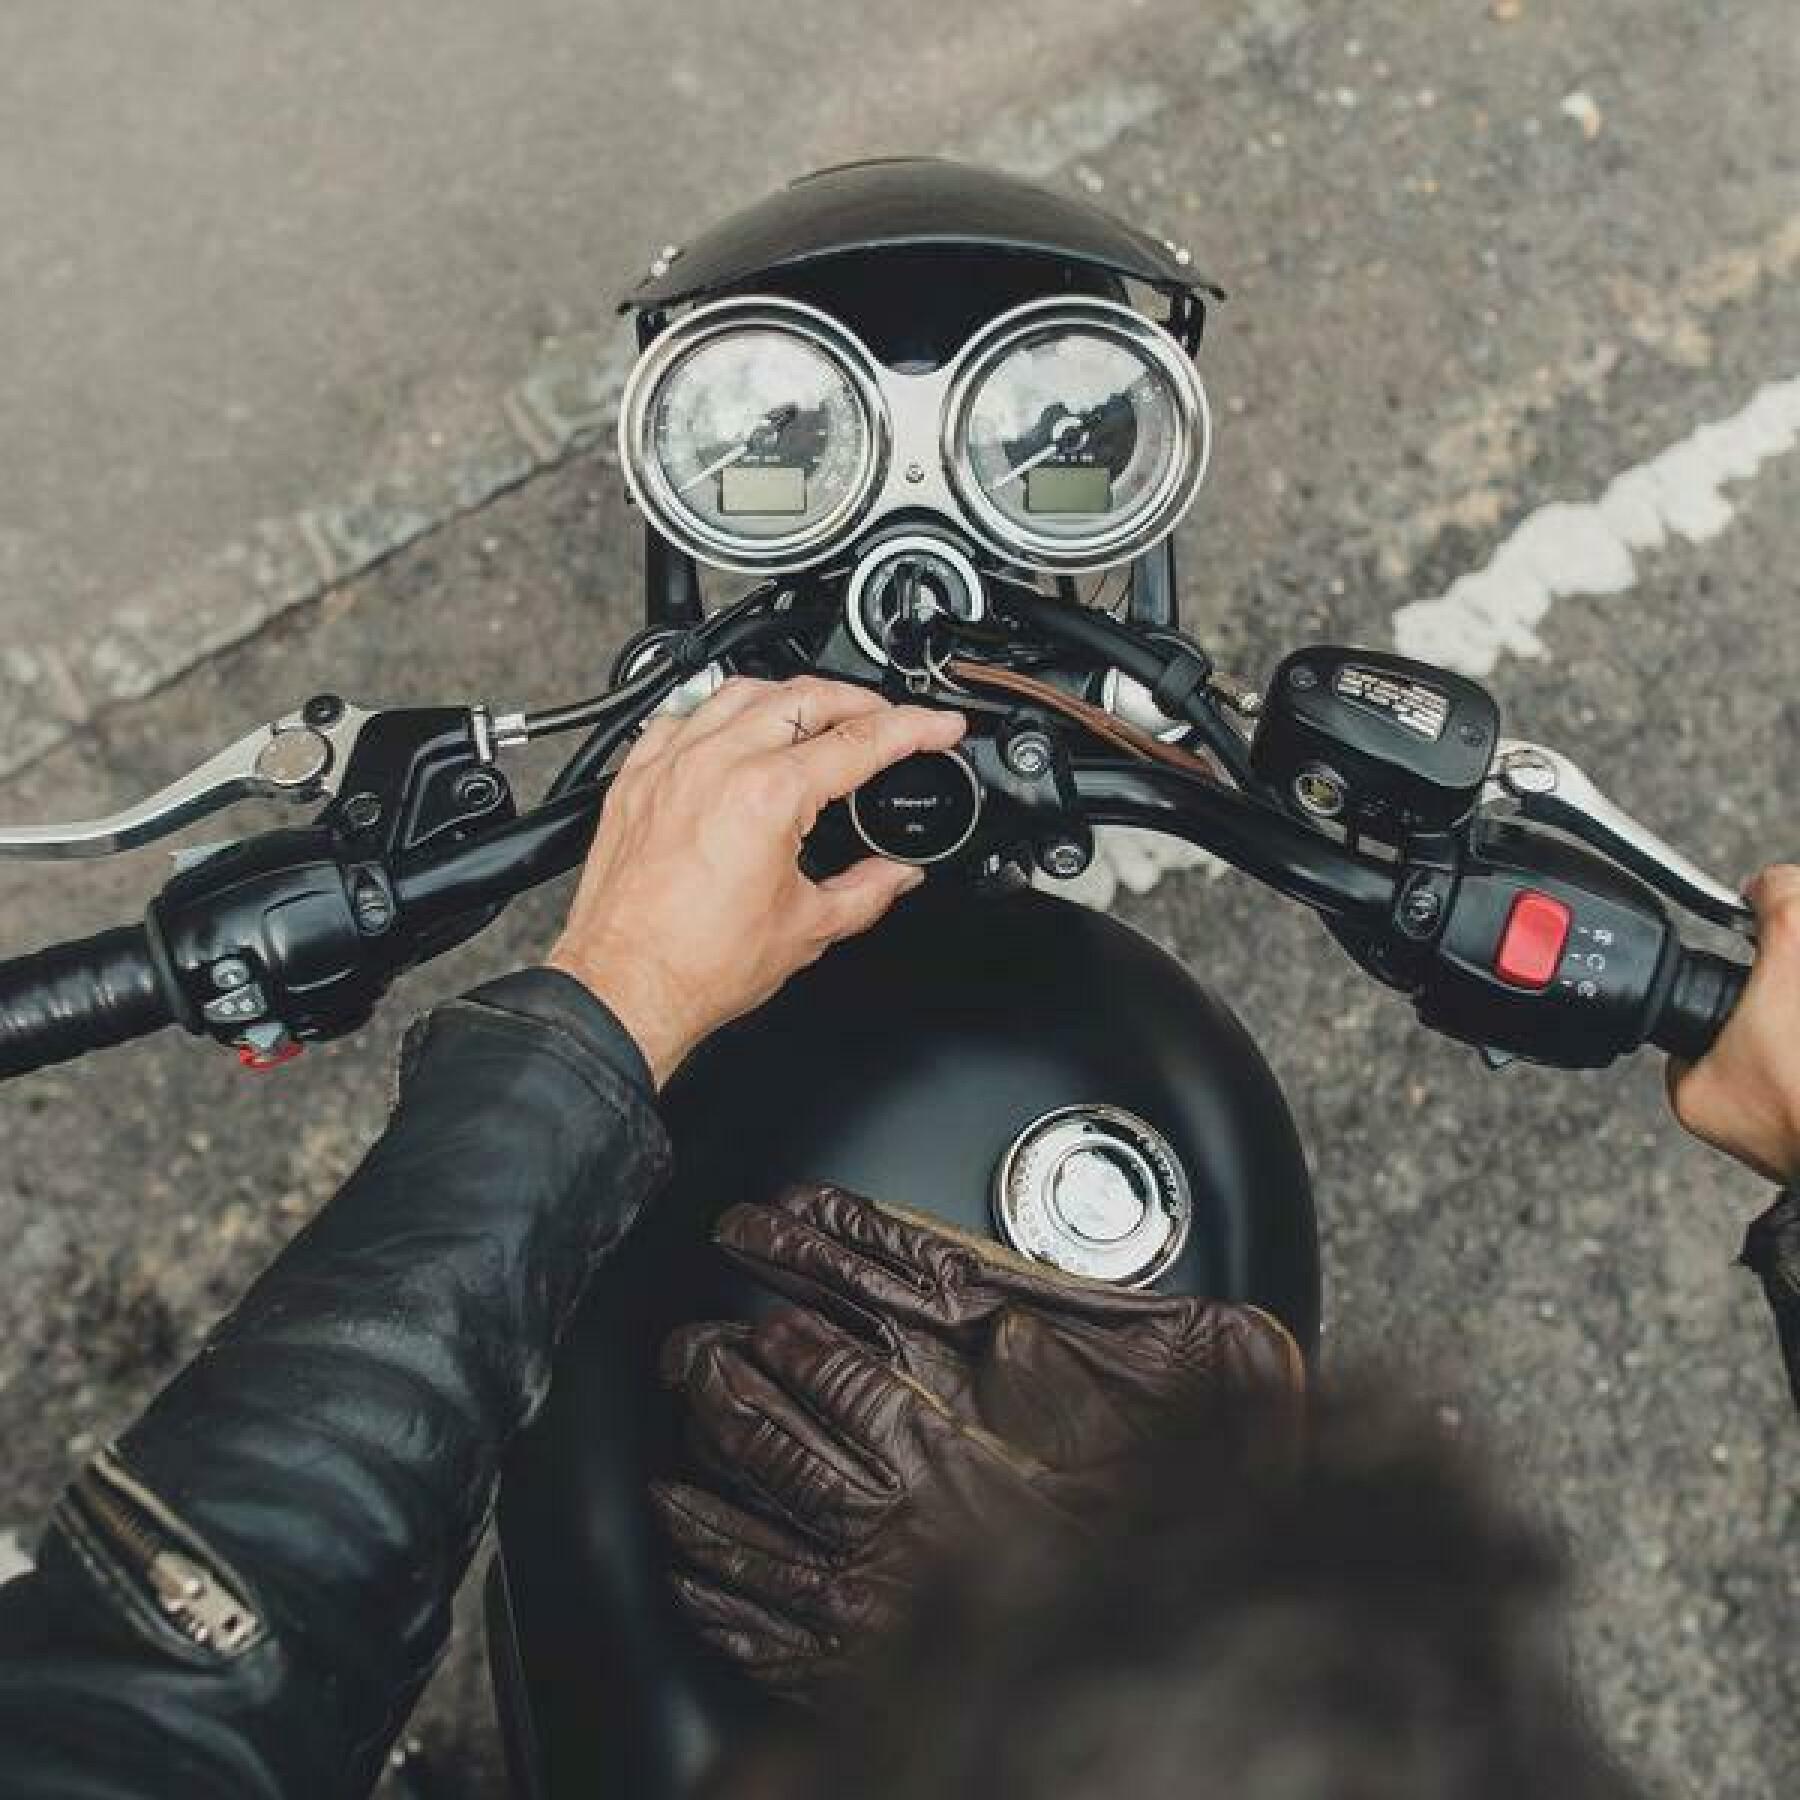 Intelligent and intuitive motorcycle gps compass Beeline